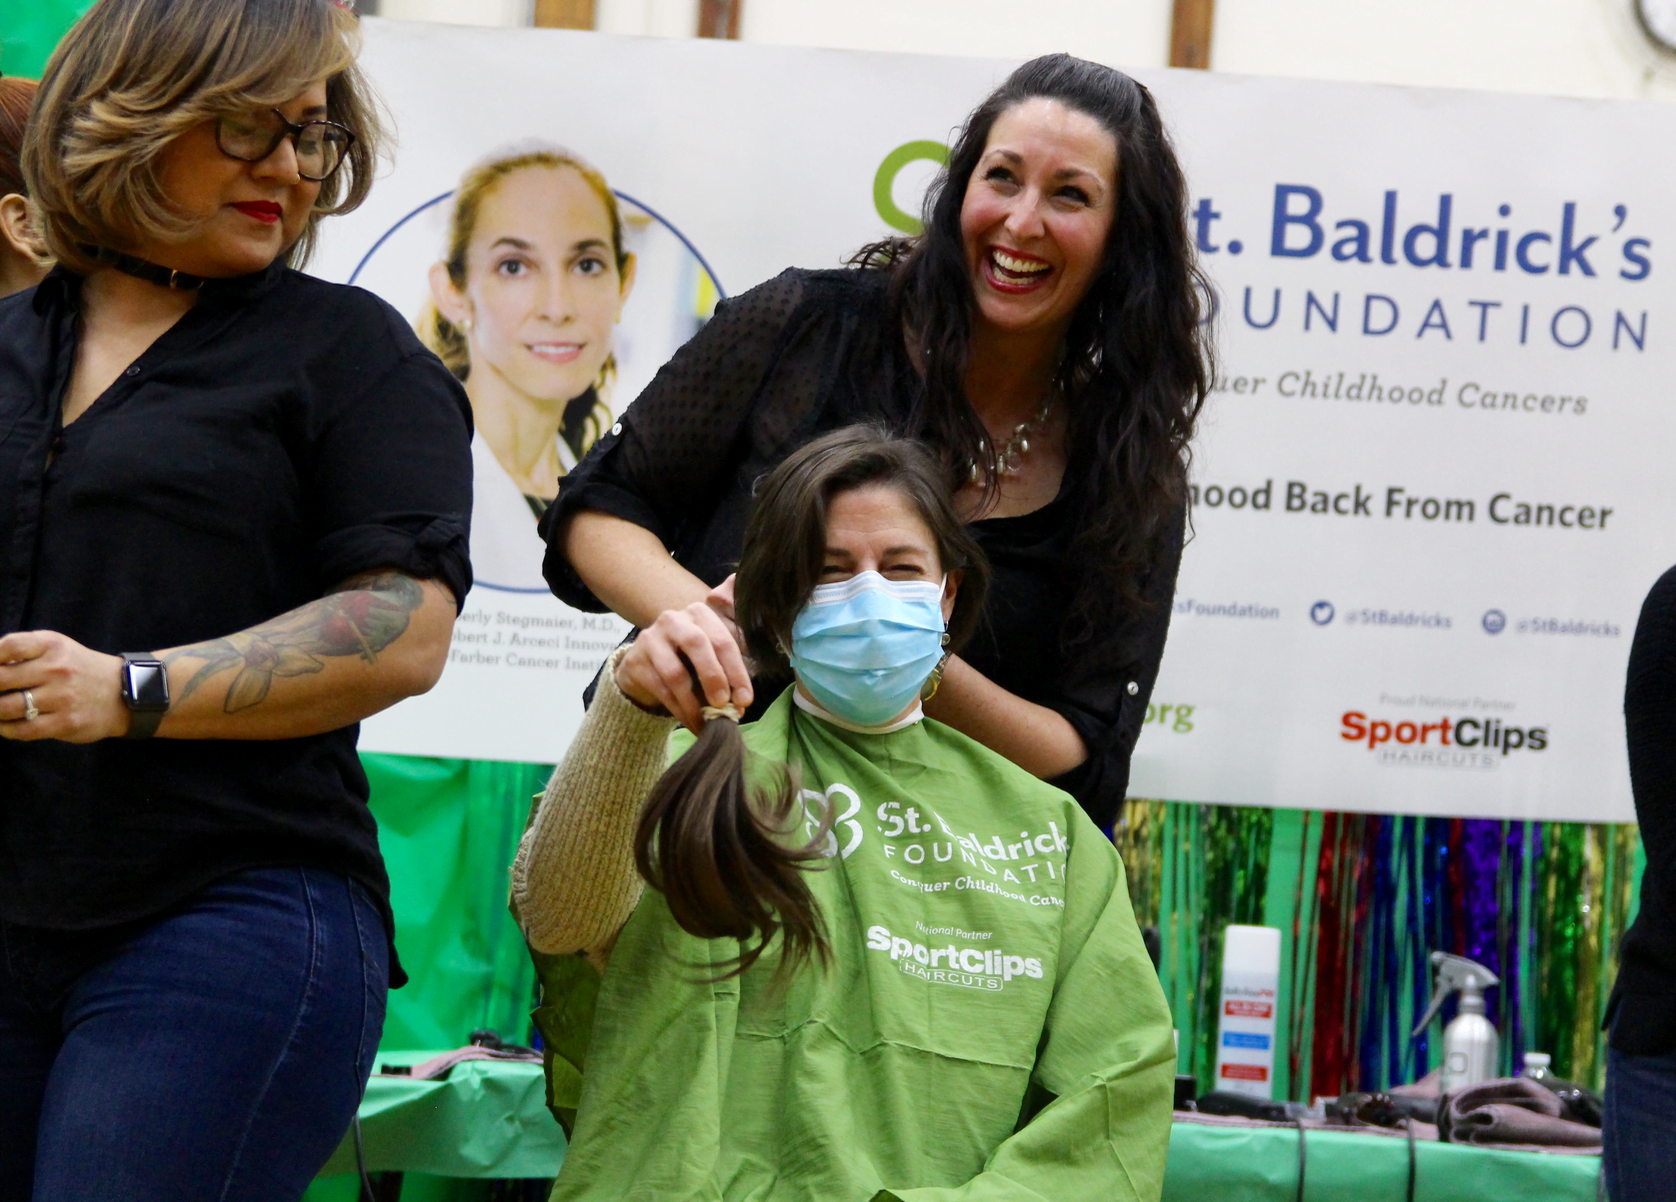 Heather Brown with her pony tail just before being shaved at the St. Baldrick's Foundation fundraiser at Western Middle School. March 15, 2018 Photo: Leslie Yager